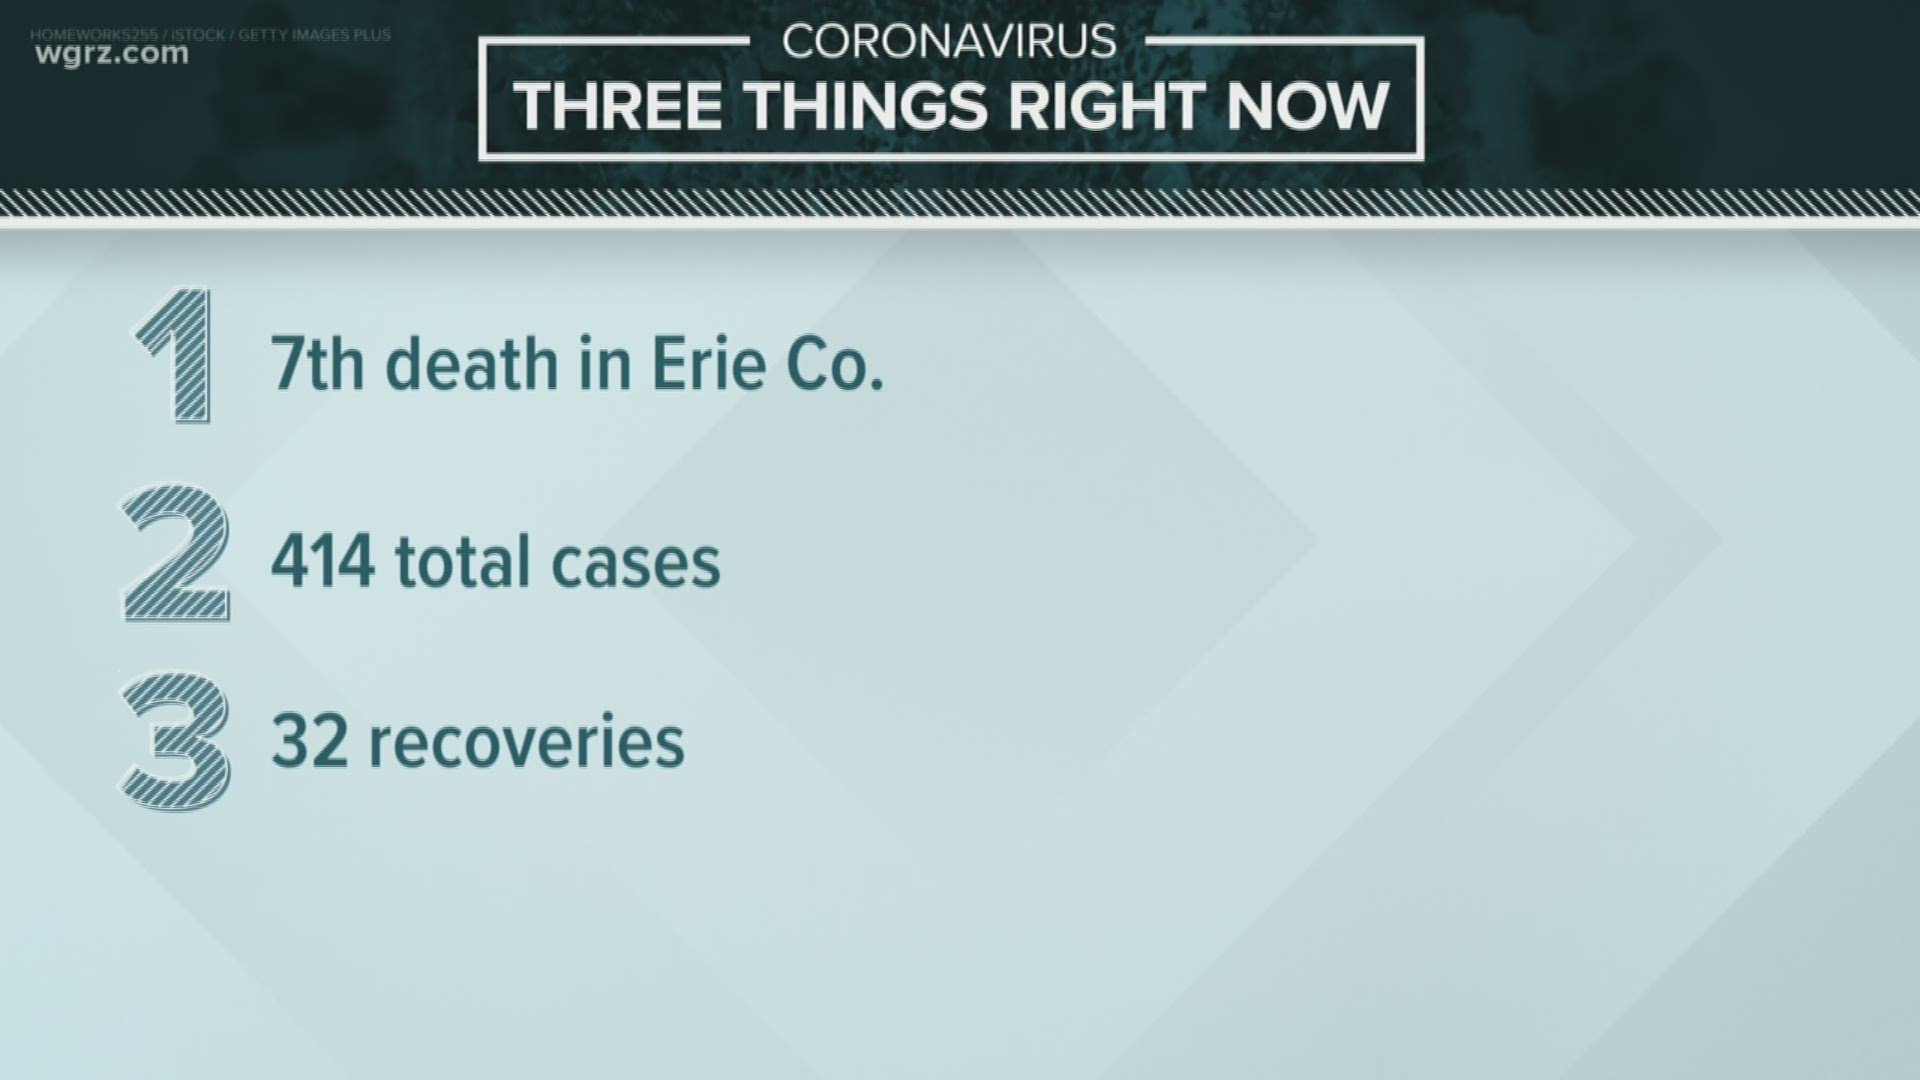 All the counties in Western New York have reported some new cases this weekend. 34 additional positive cases were announced today, bringing the total in Erie to 414.